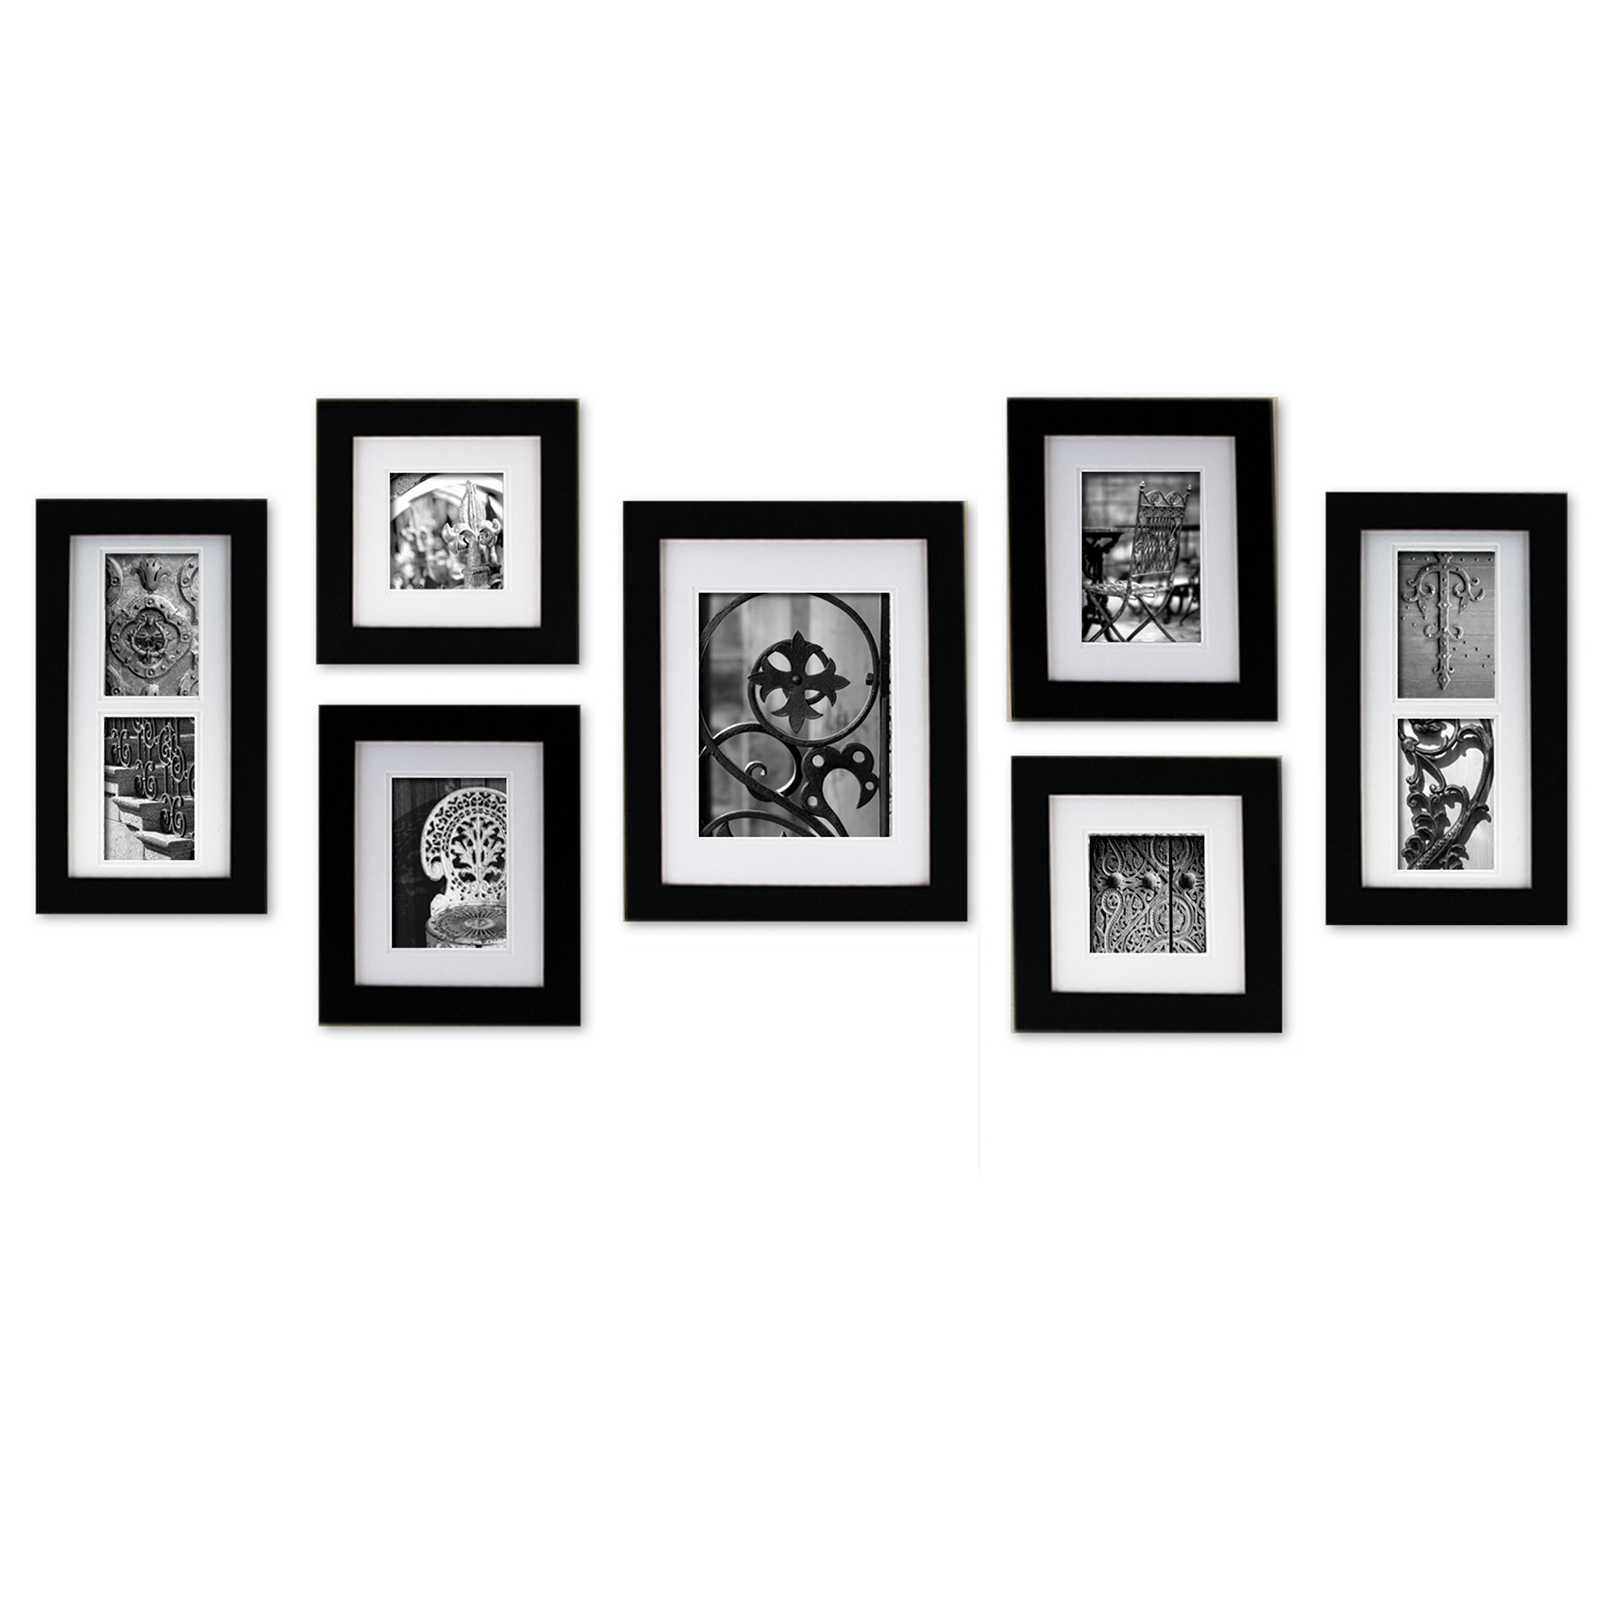 Buy the Gallery Perfect© Hang Your Own Gallery© MDF Frame Kit, Black at Michaels